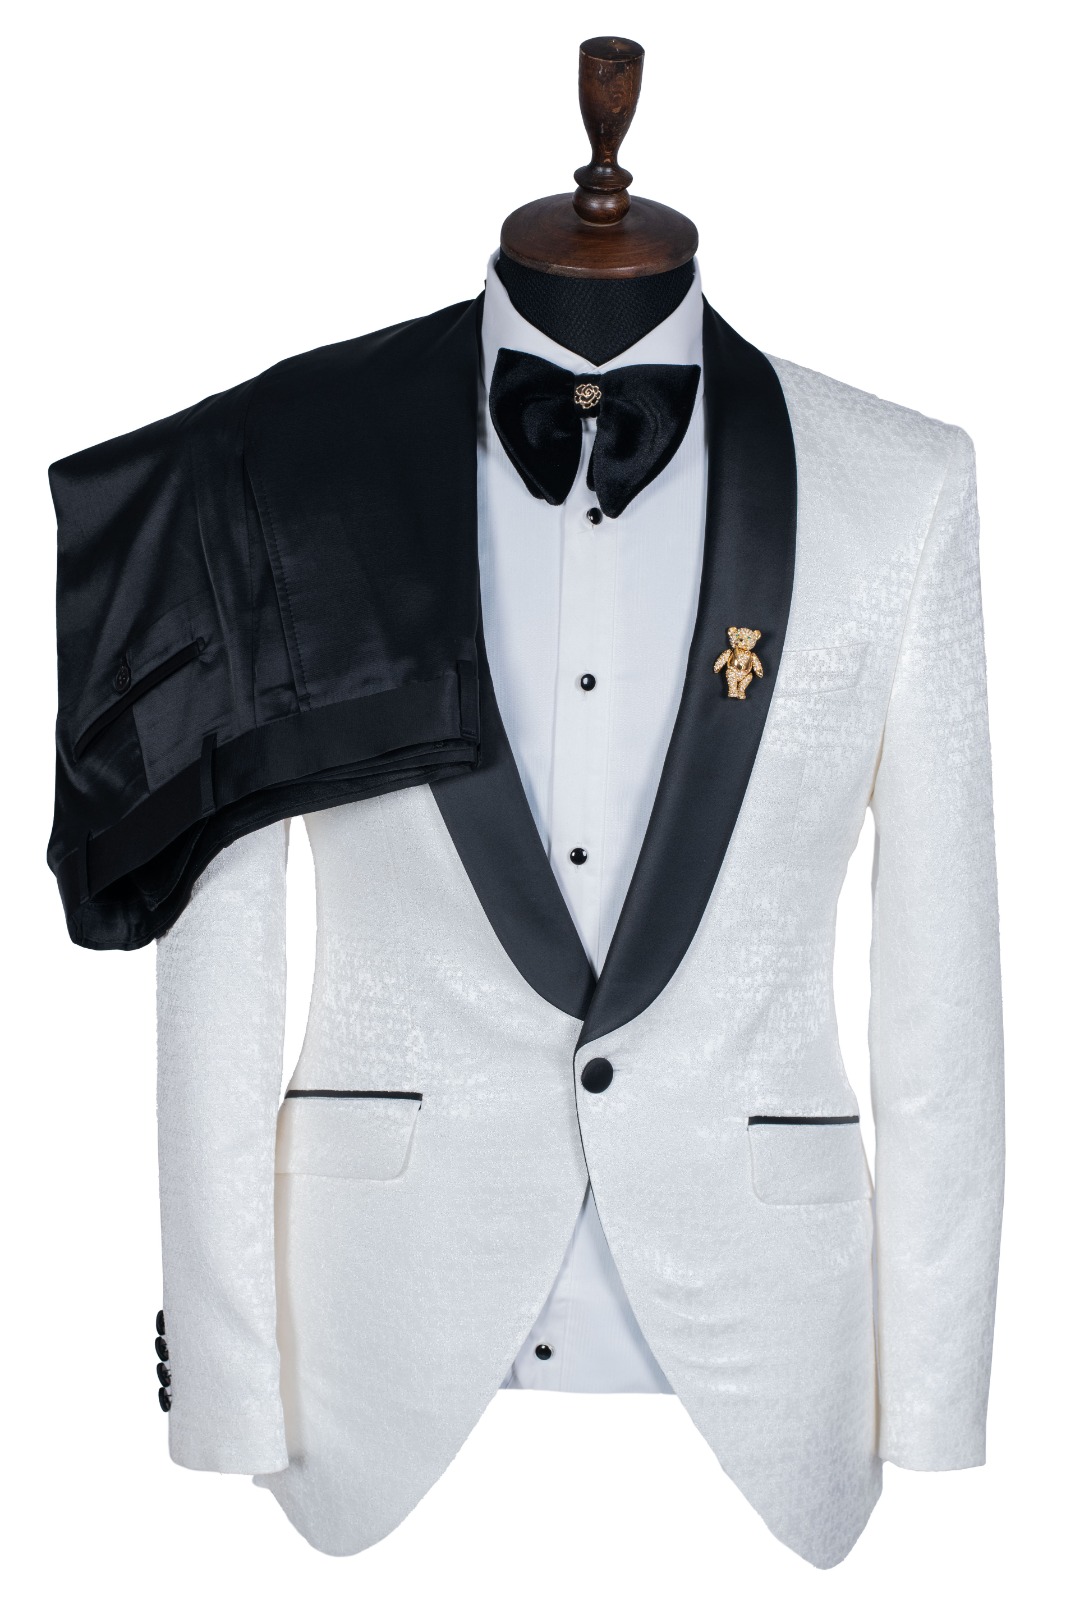 STANLION WHITE TUXEDO SINGLE BREASTED SUIT